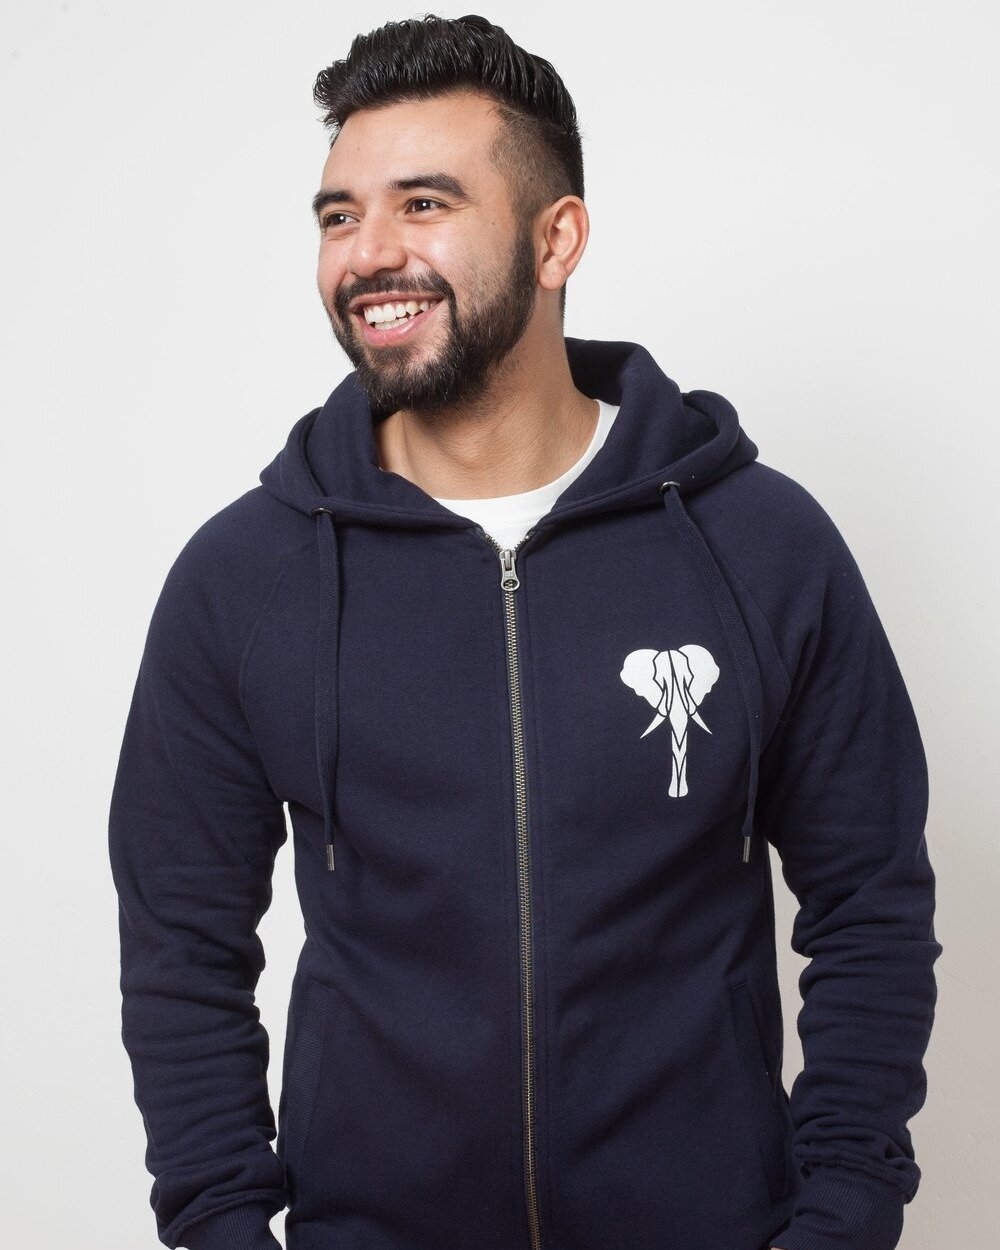 One of the comfiest hoodies you'll ever wear.

Our Zipped Hoodies are made from 100% organic cotton and ethically printed using environmentally friendly inks 😊

Available at agesapparel.com
Link in bio 👆

#agesapparel #africaninspired #hoodie #orga